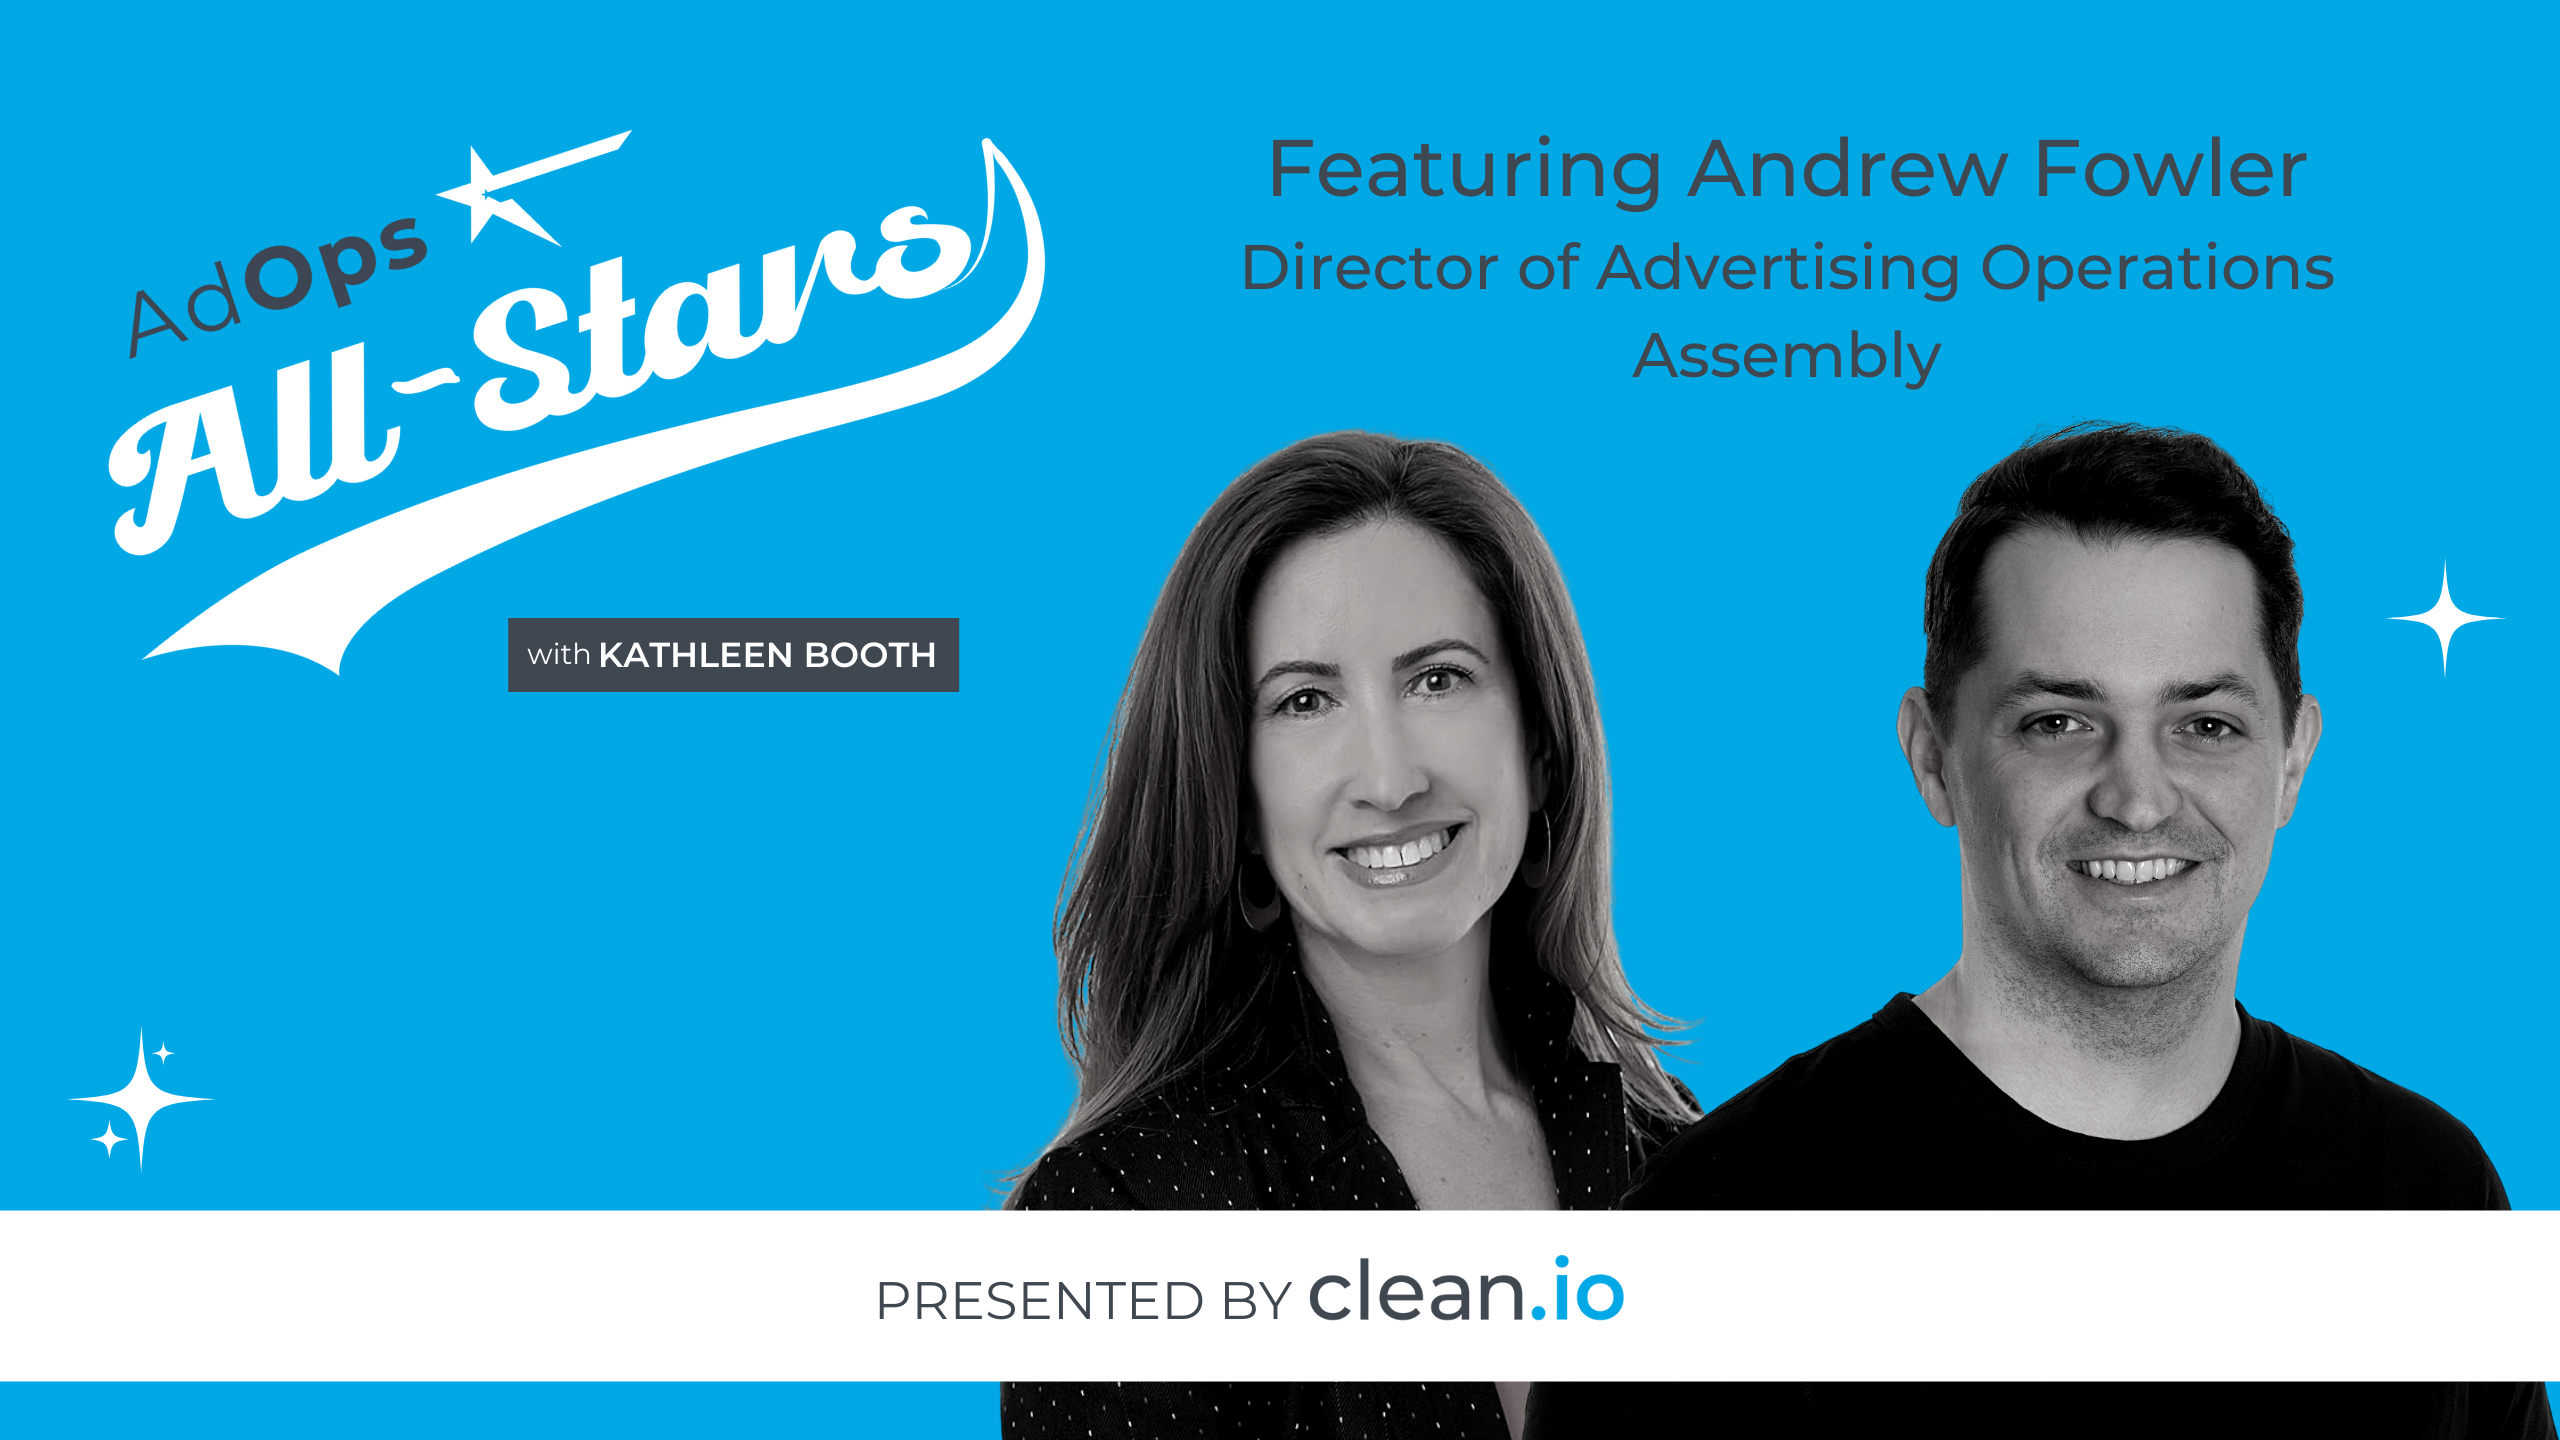 Ad Ops All Stars: Andrew Fowler, Assembly